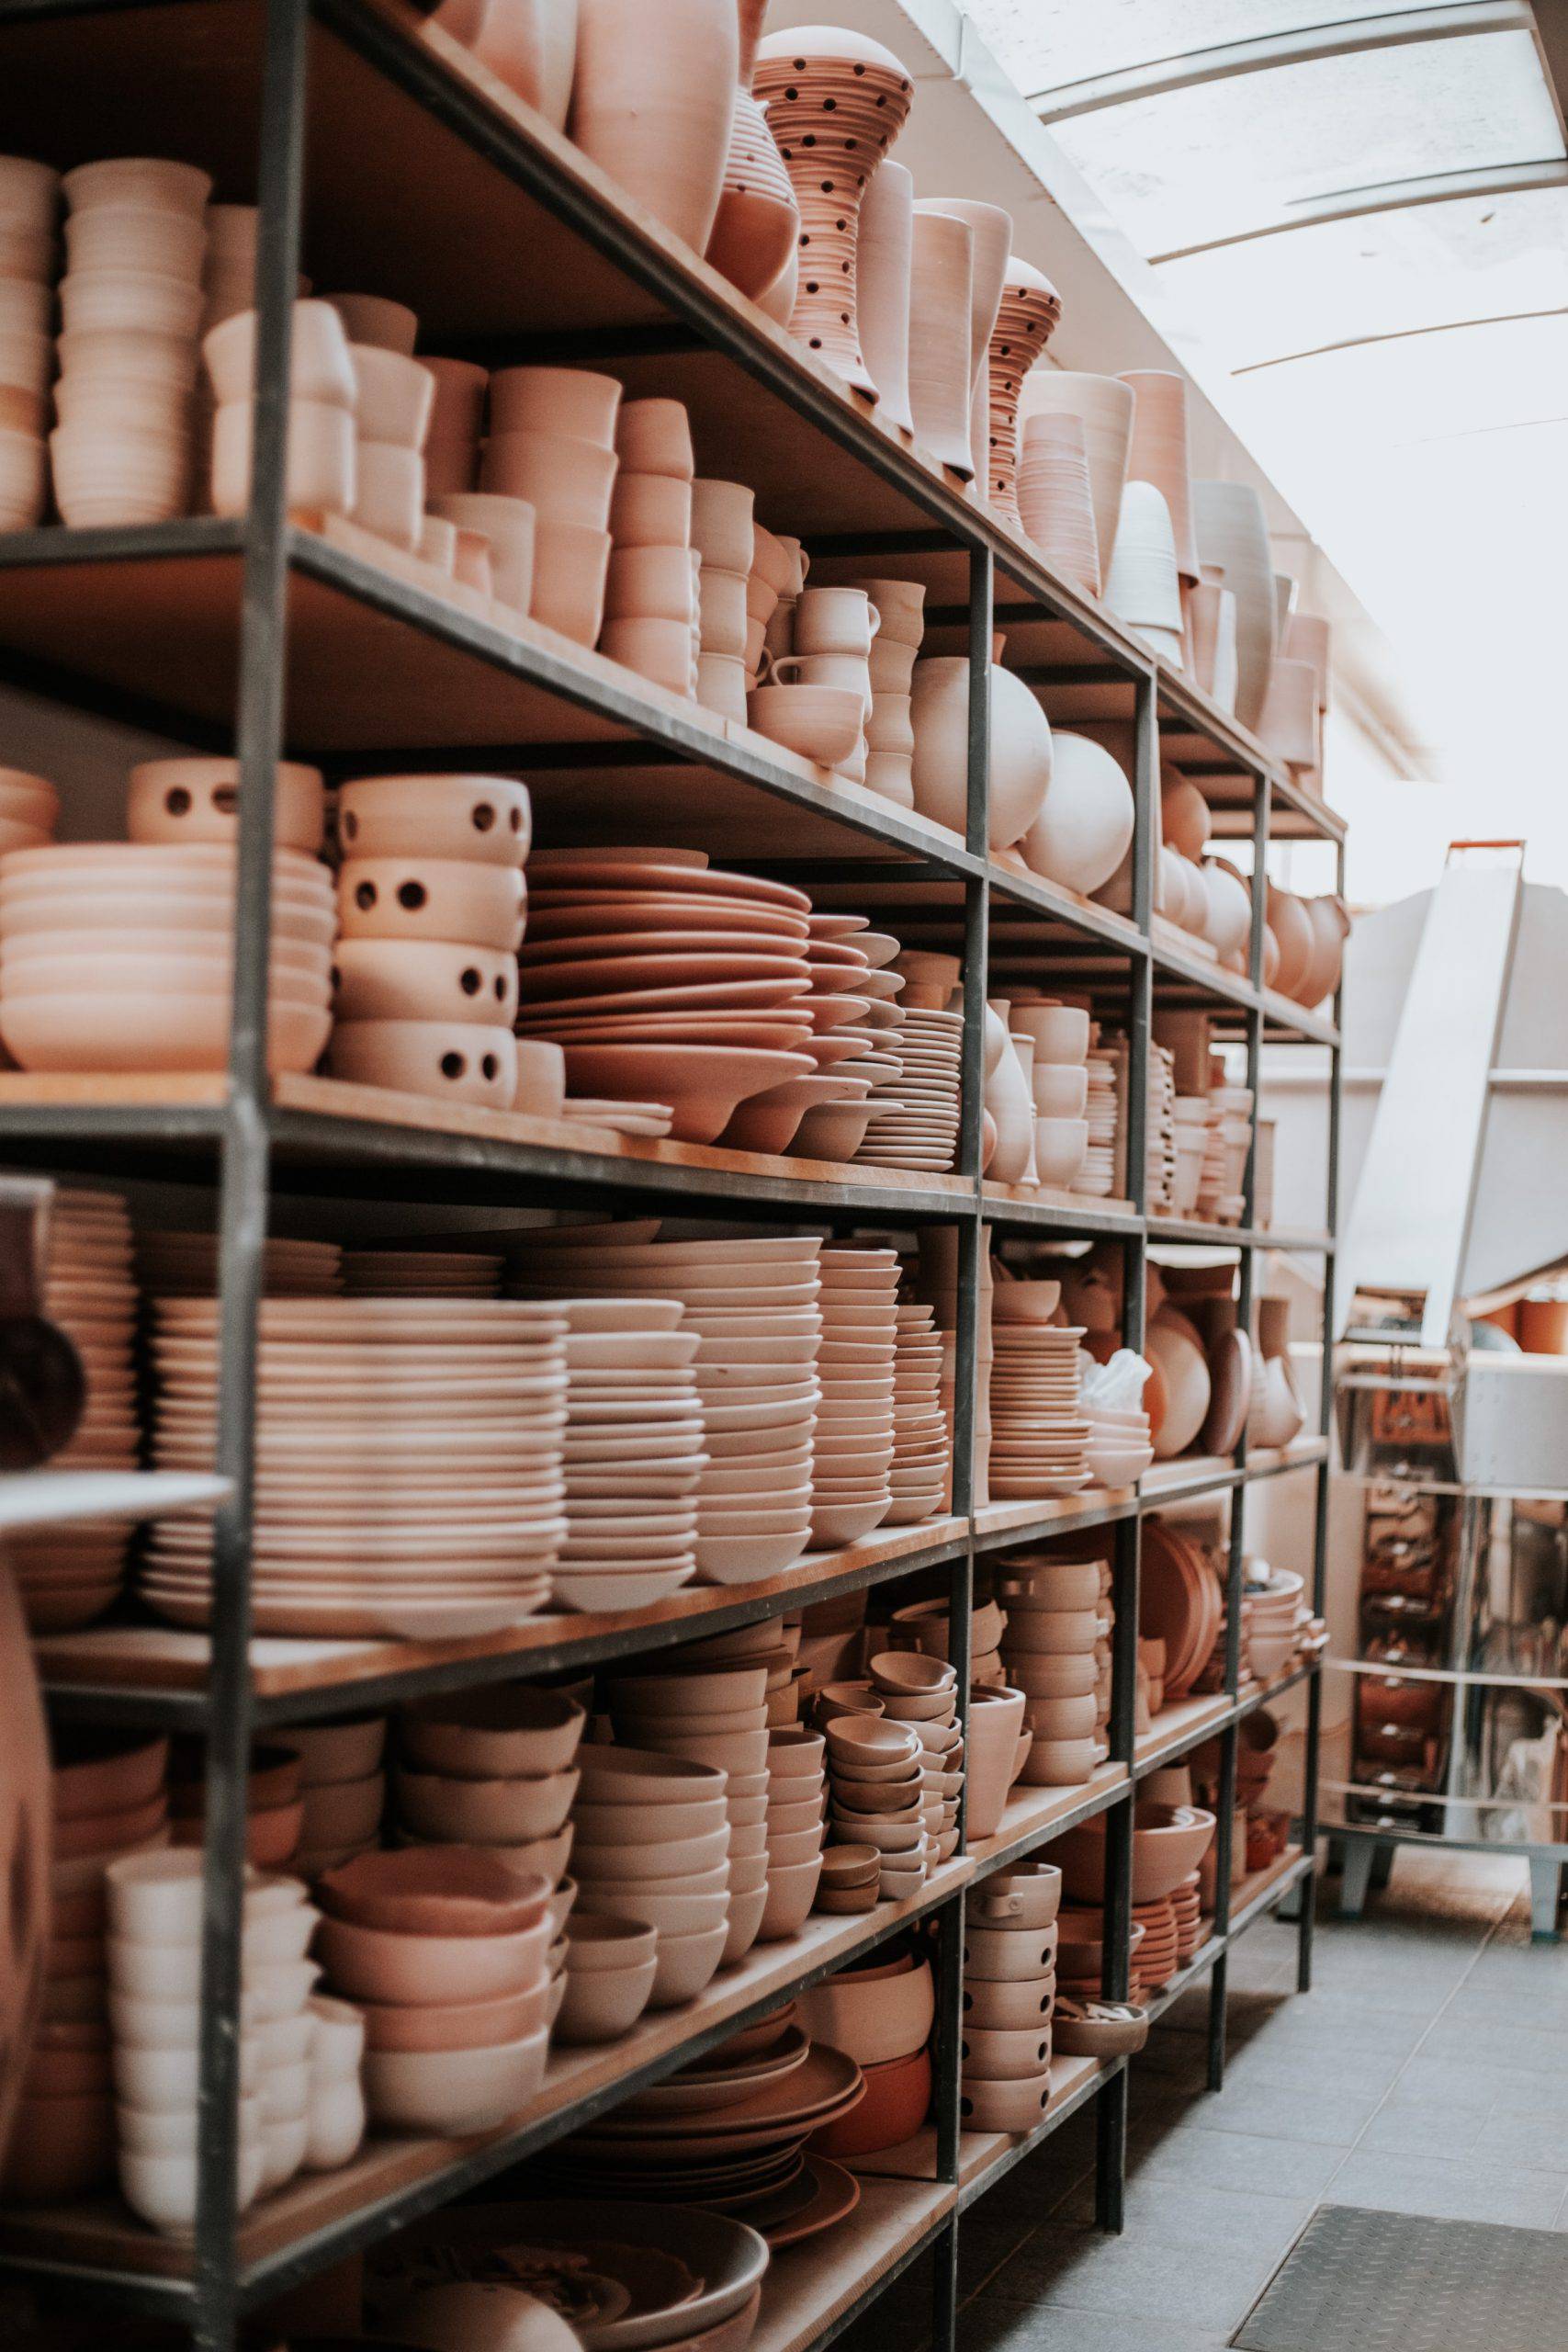 pottery business ideas in tamil